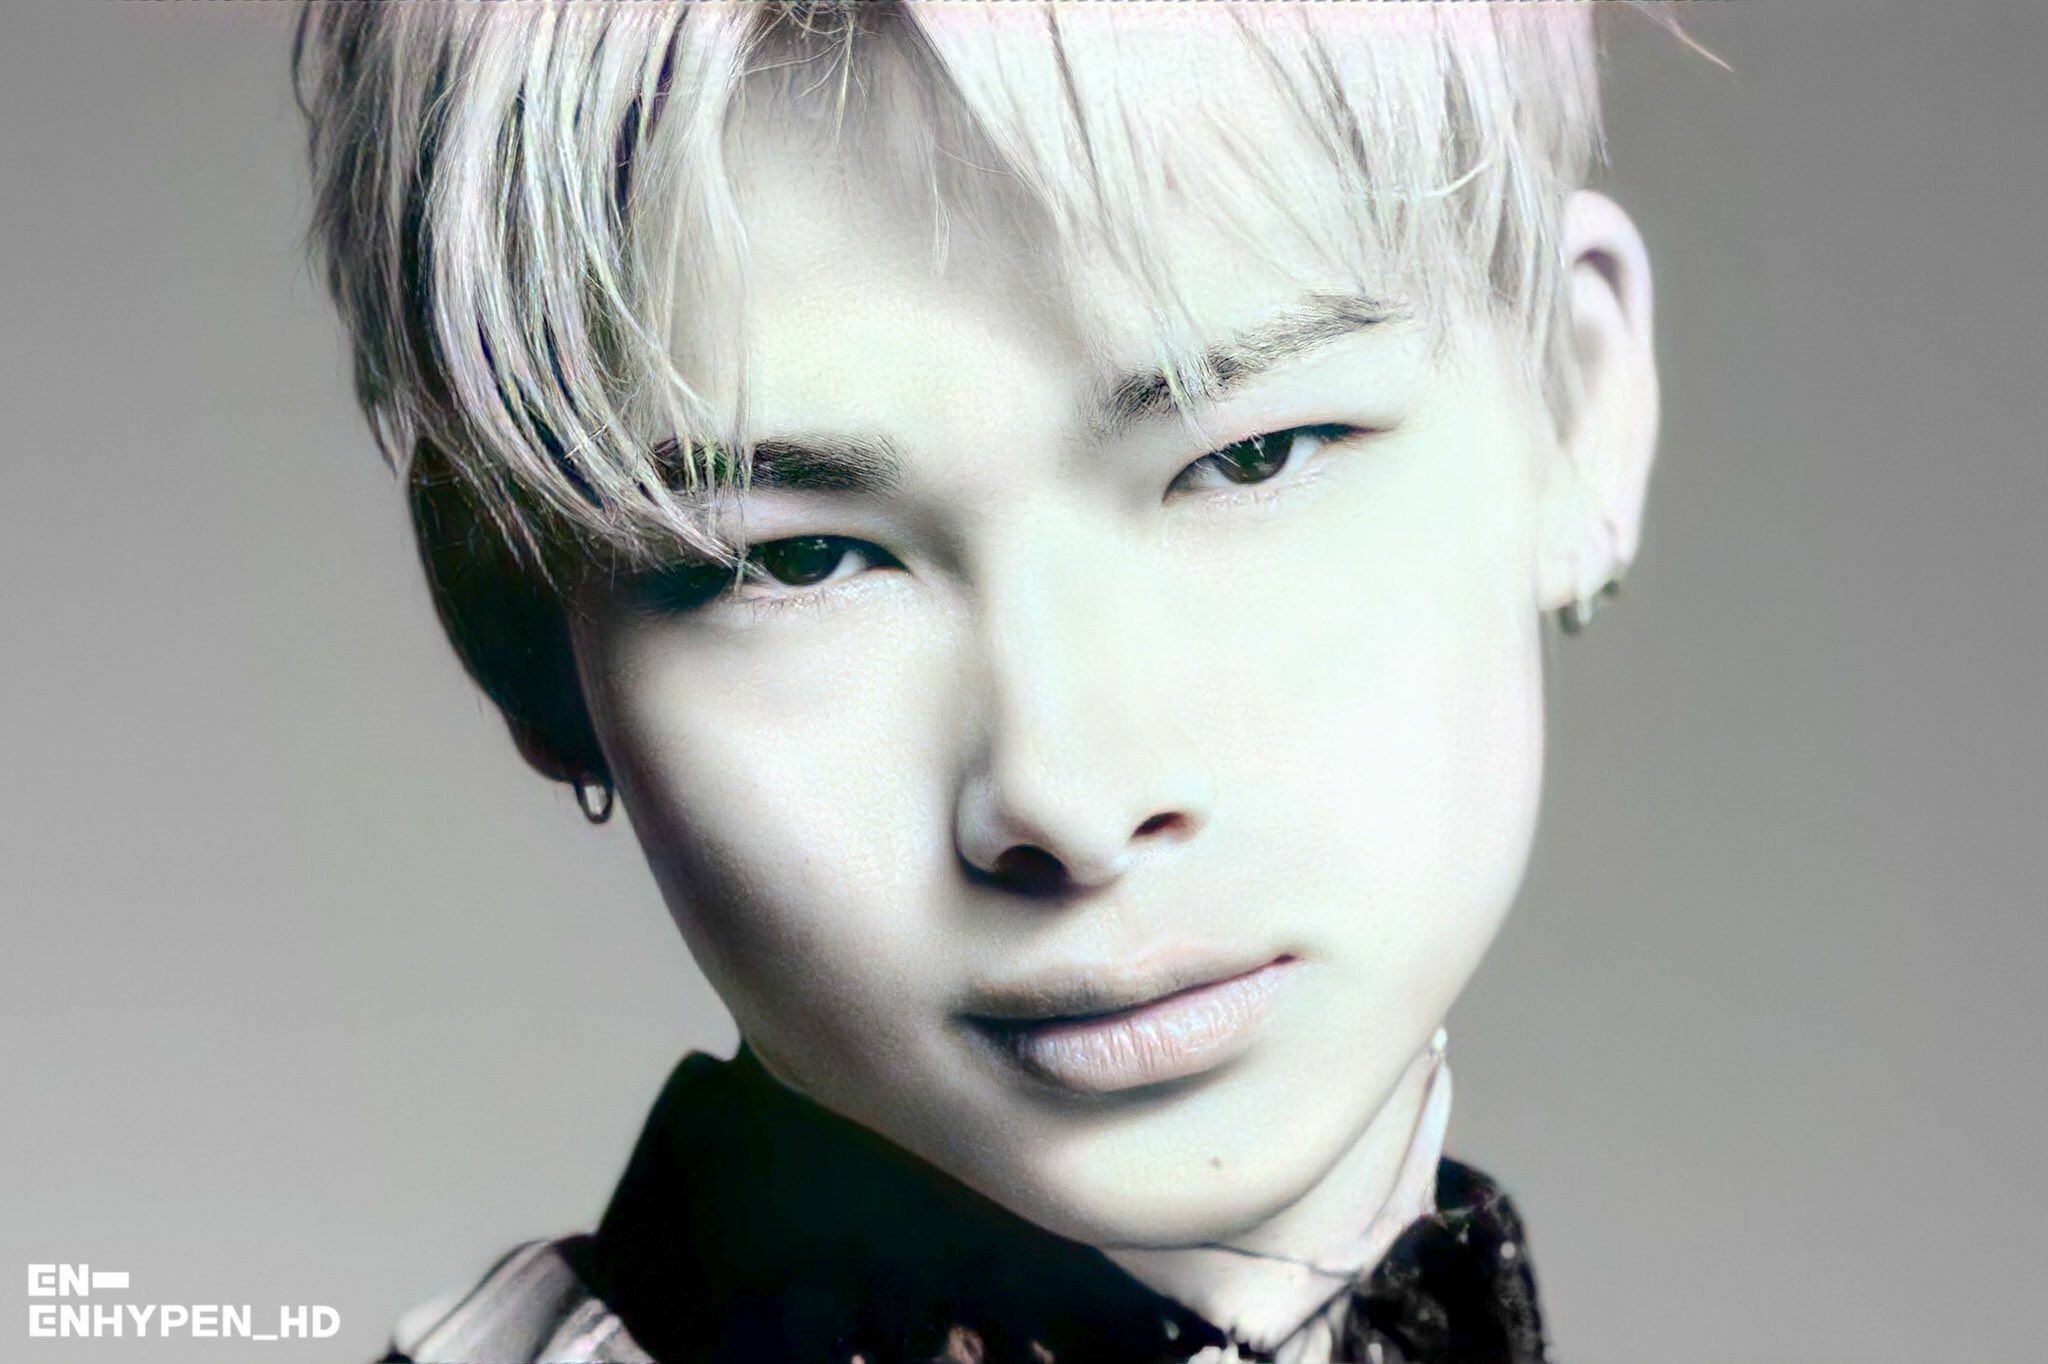 Ni-ki (ENHYPEN): ENHYPEN, Was mentioned by Modelpress as one of the 5 emerging Japanese K-pop idols. 2050x1370 HD Background.